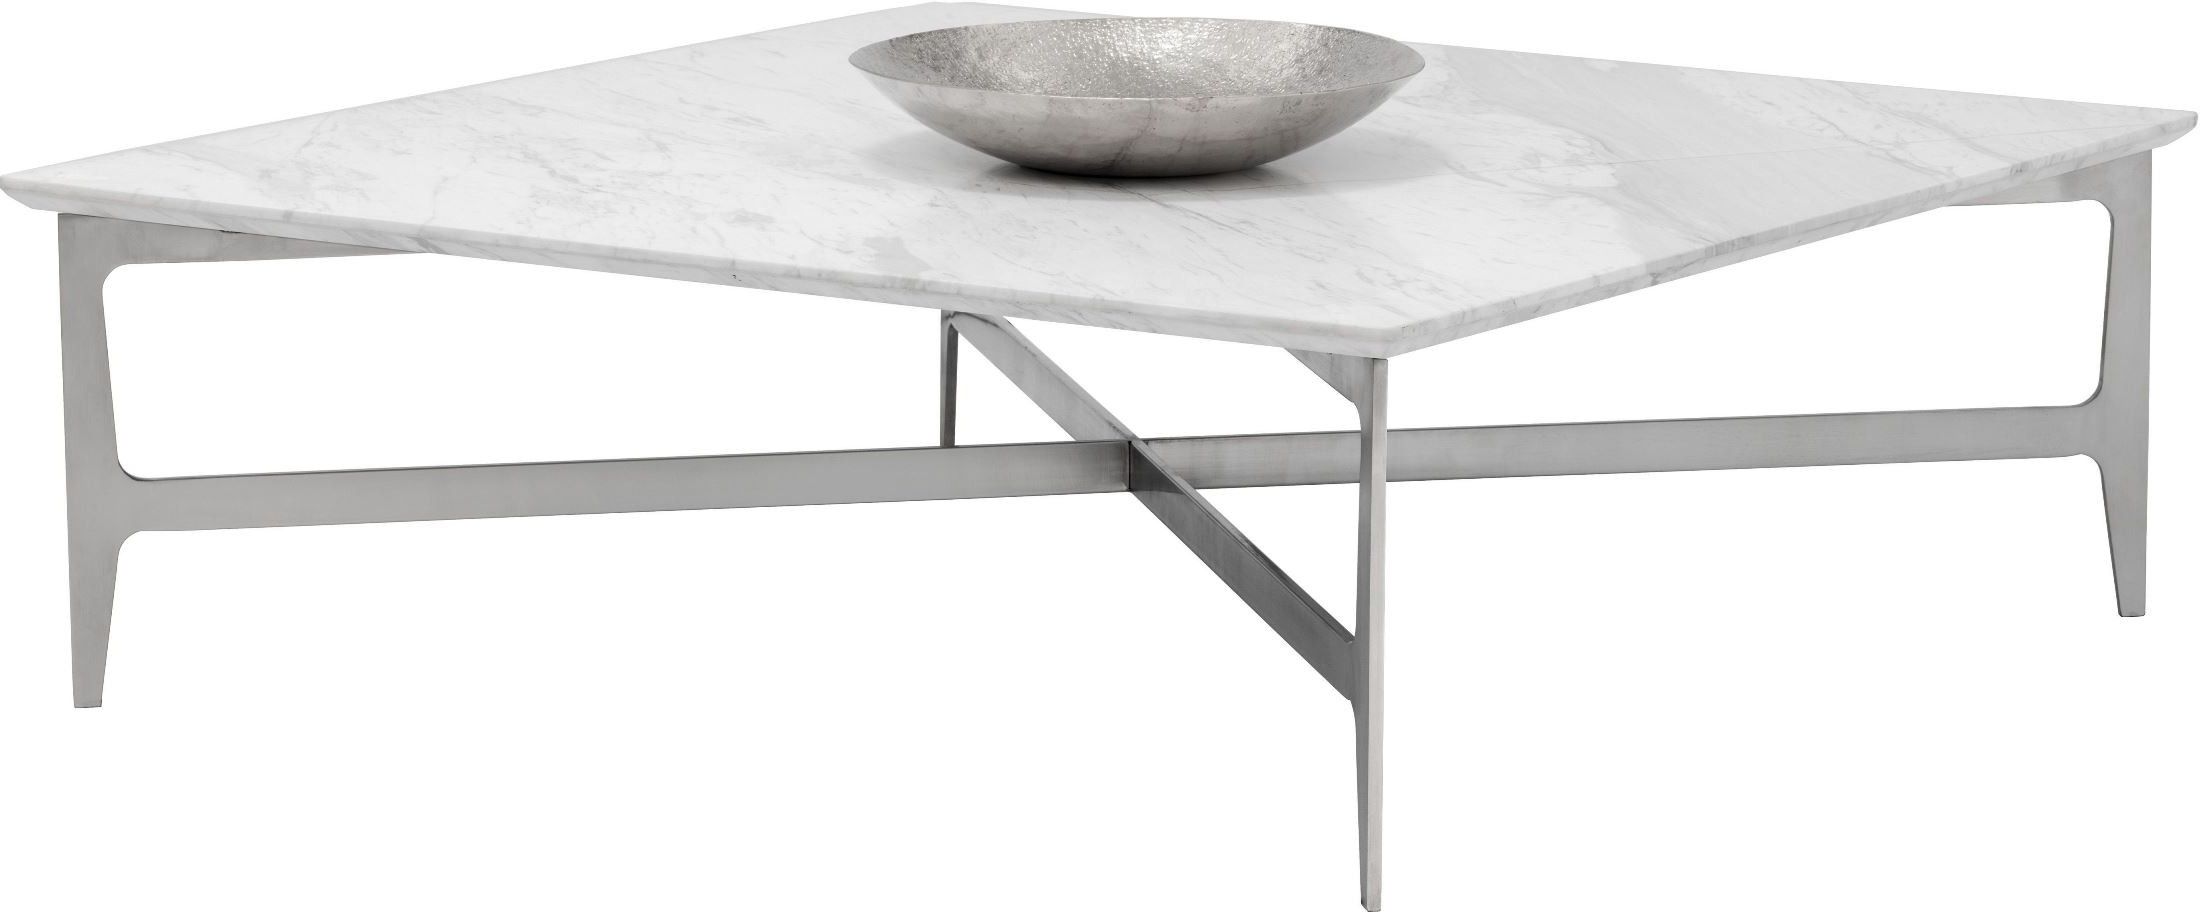 Famous White Stone Coffee Tables With Regard To Clearwater White Marble Square Coffee Table, 101503 (Gallery 19 of 20)